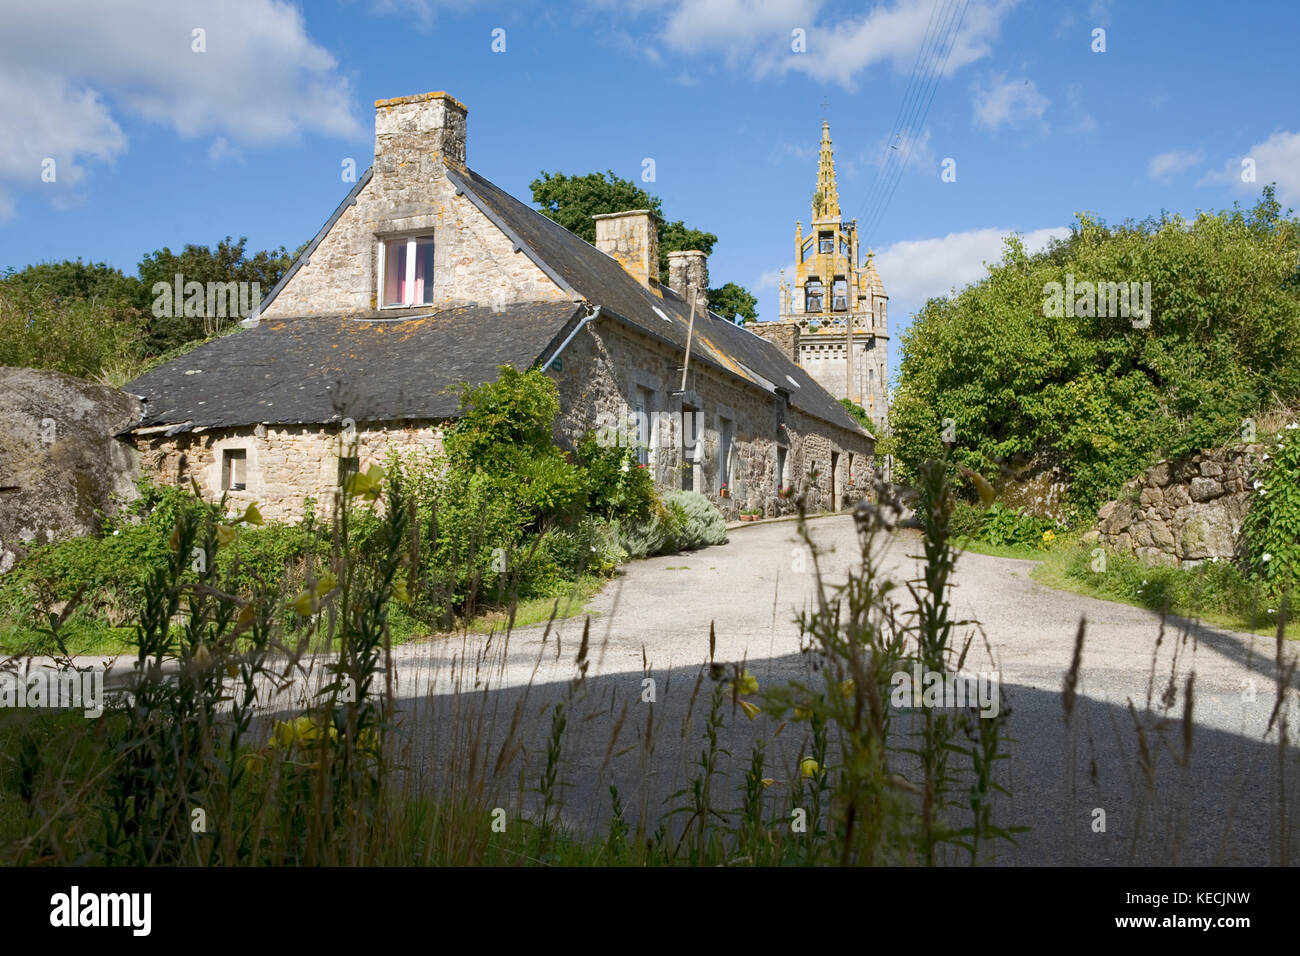 An unusual church tower and a sleepy rural lane with stone cottages, St-Connan, Côtes-d'Armor, Brittany, France Stock Photo